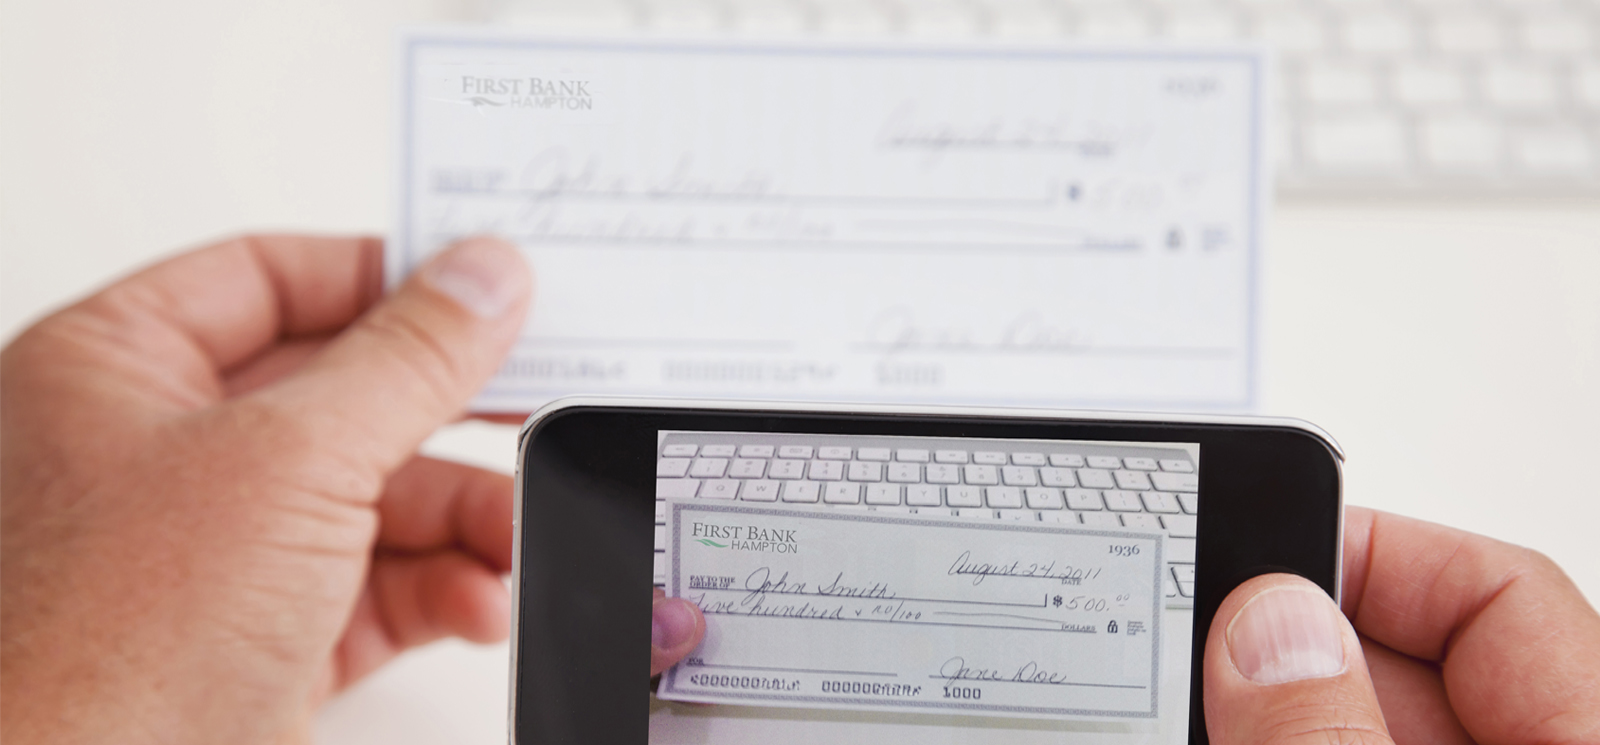 Shows a hand holding a smart phone with the image of a check to be deposited. The check is being held in the background by the other hand.